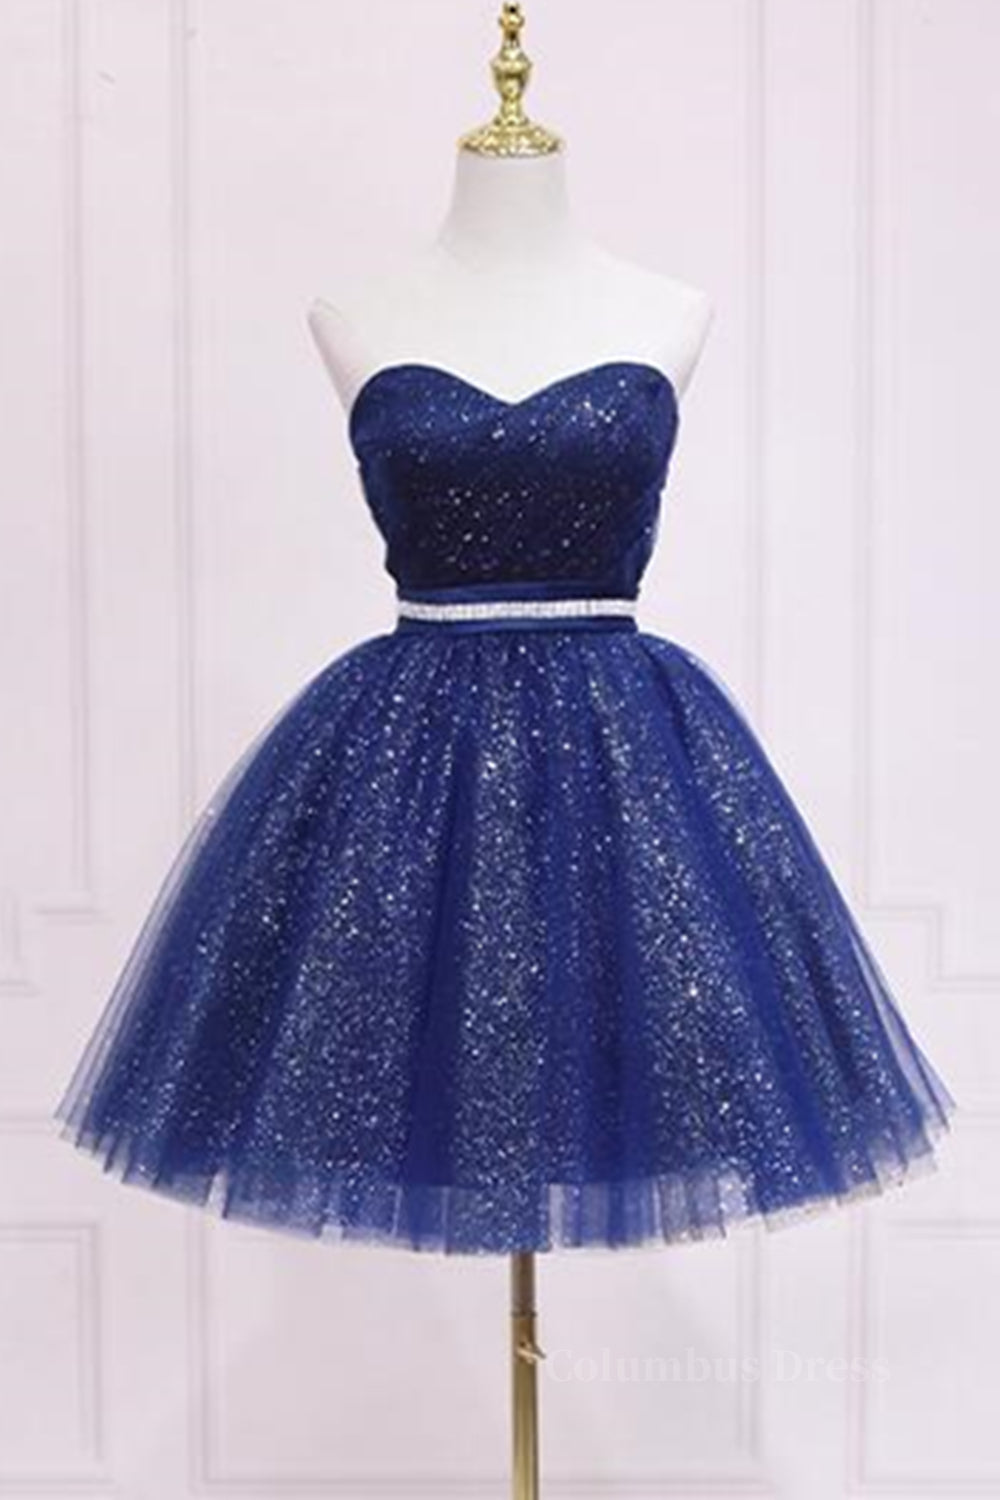 Shiny Strapless Sweetheart Neck Blue Short Corset Prom Corset Homecoming Dress with Belt, Sparkly Blue Corset Formal Evening Dress outfit, Evening Dresses 2029